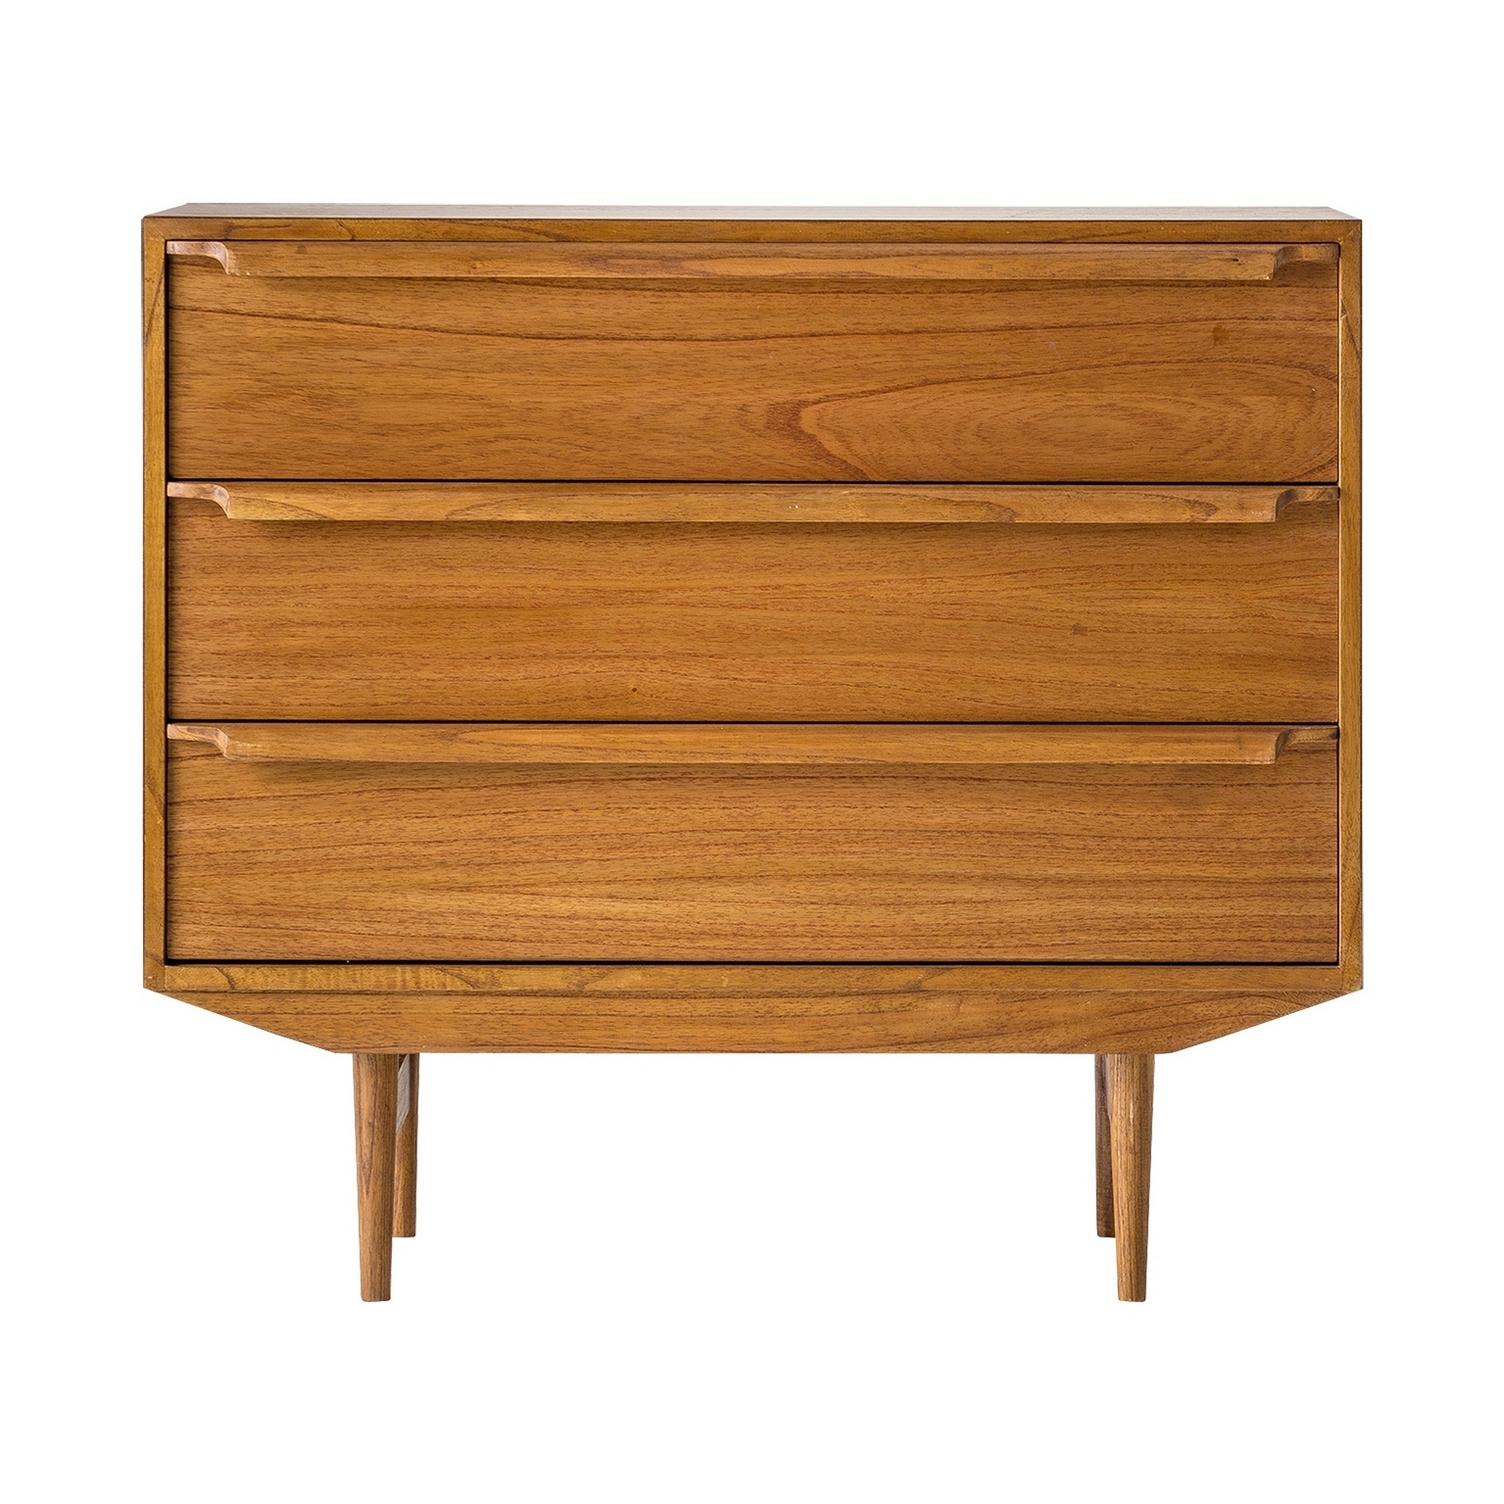 European Midcentury Style and Danish Design Wooden Chest of Drawers